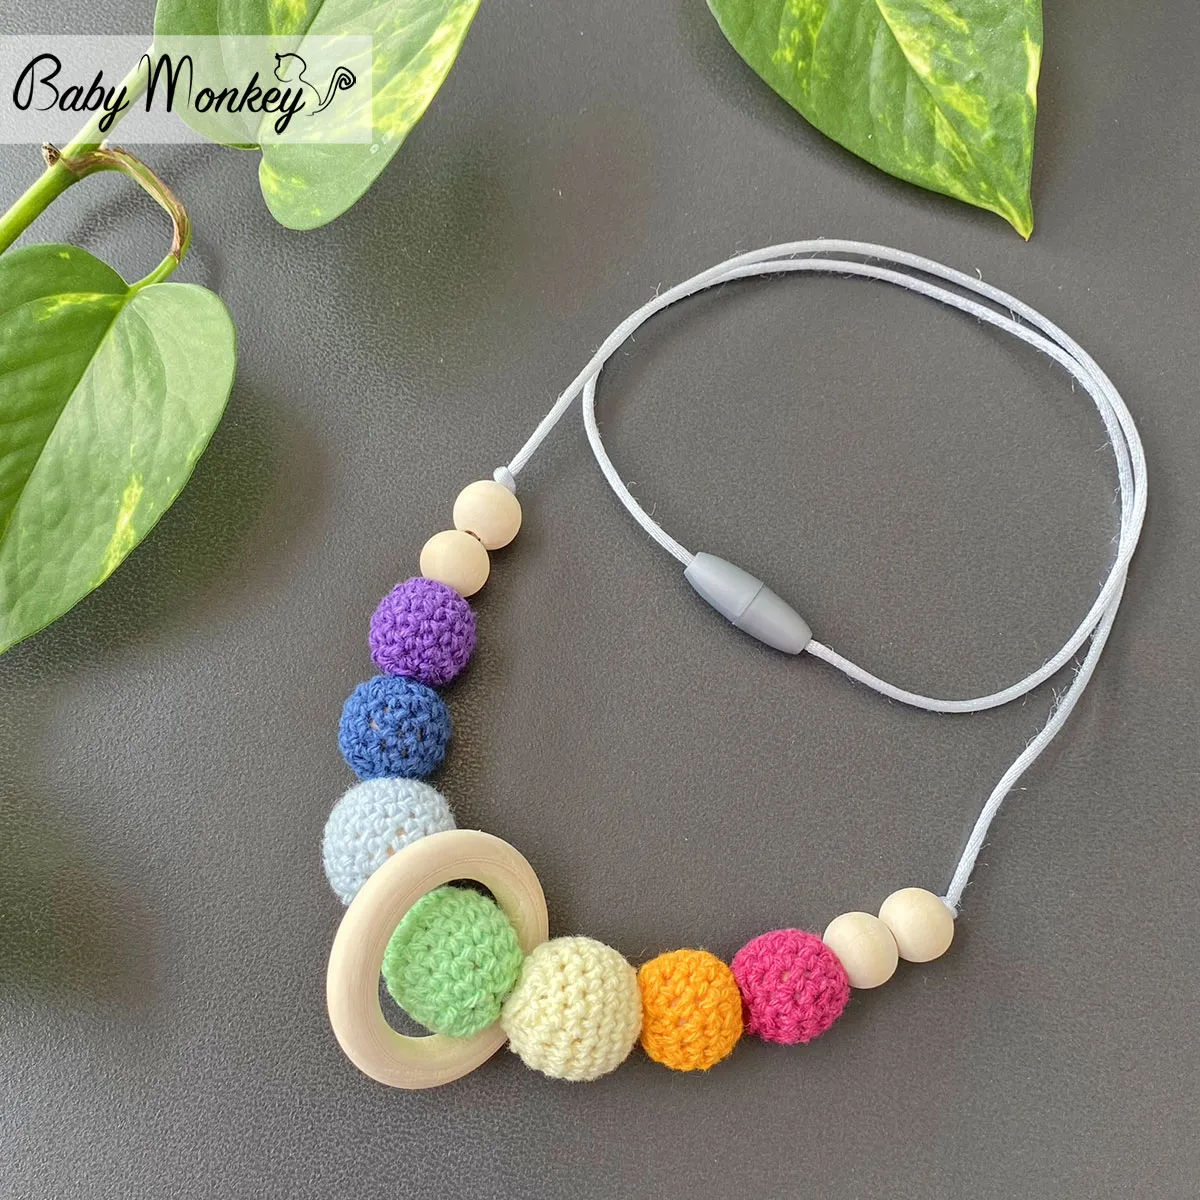 Breastfeeding and teething necklace with wooden ring